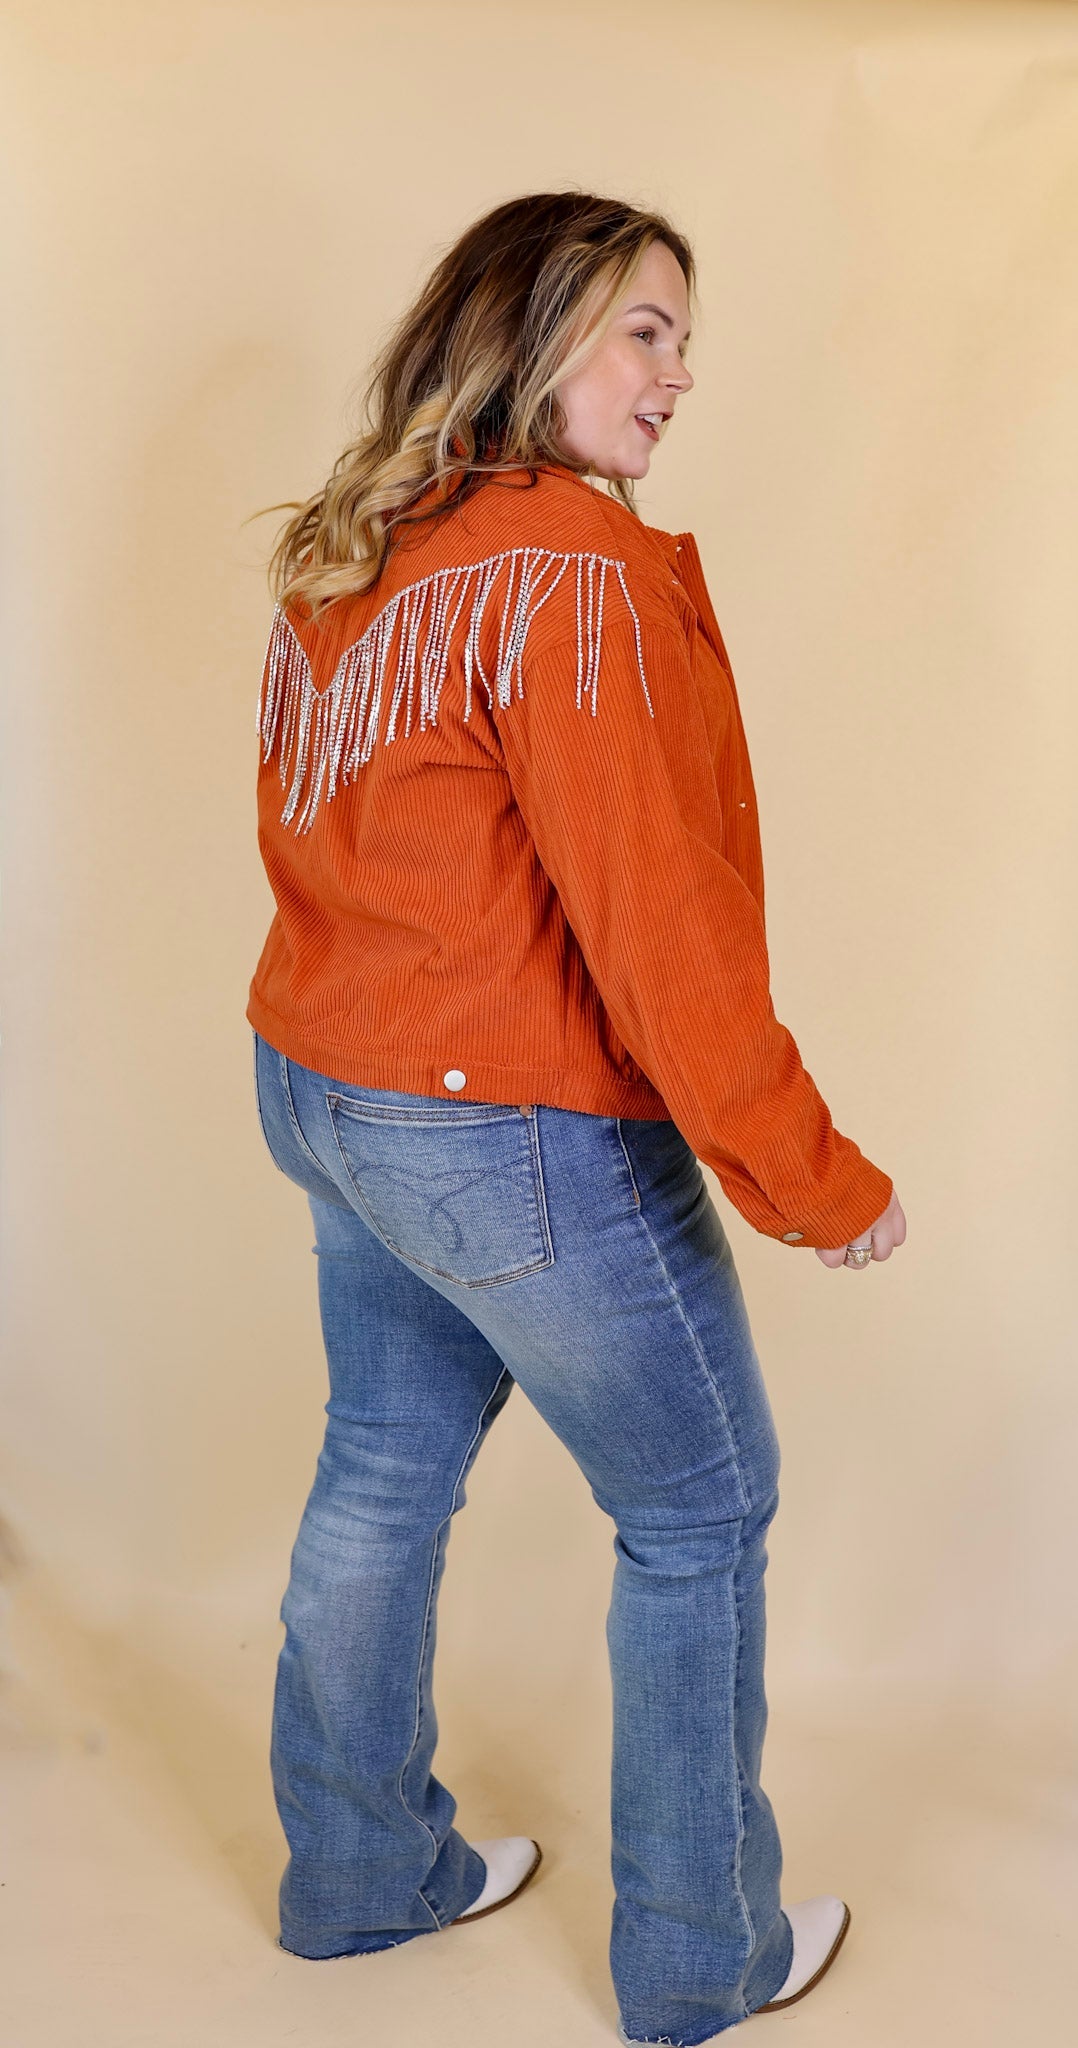 Signature Moves Button Up Corduroy Jacket with Crystal Fringe Back in Rust Orange - Giddy Up Glamour Boutique